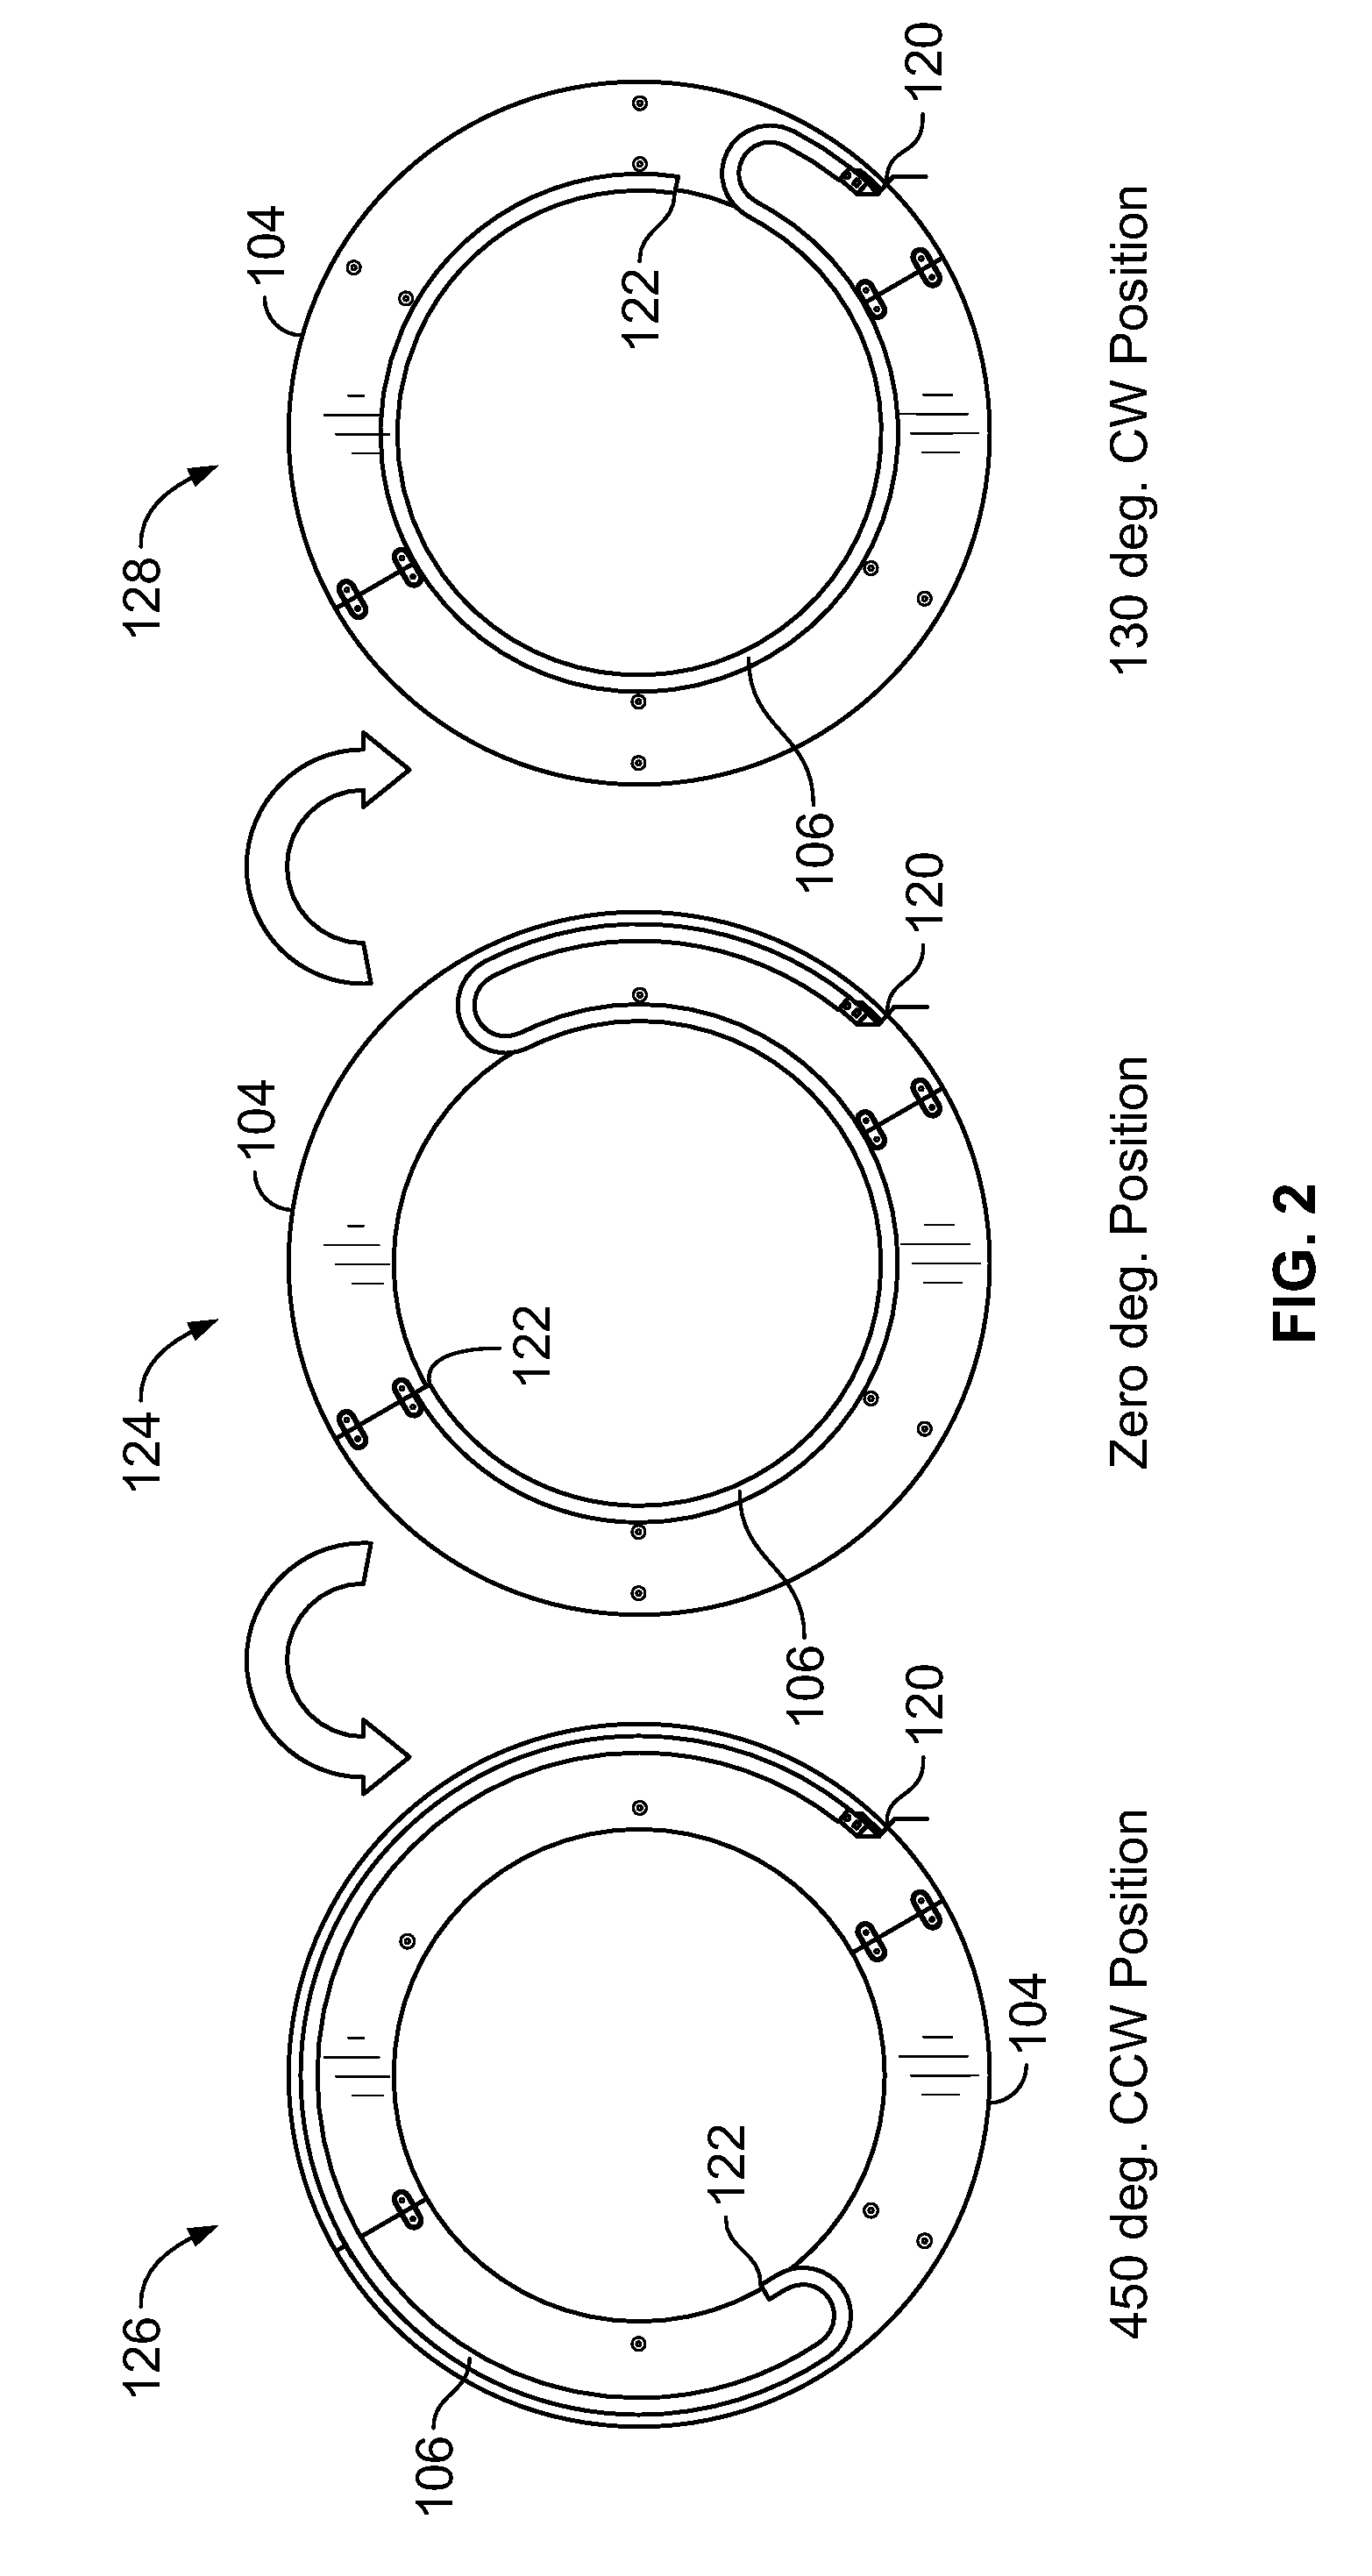 Apparatus and method for identifying the absolute rotation of a rotating imaging system